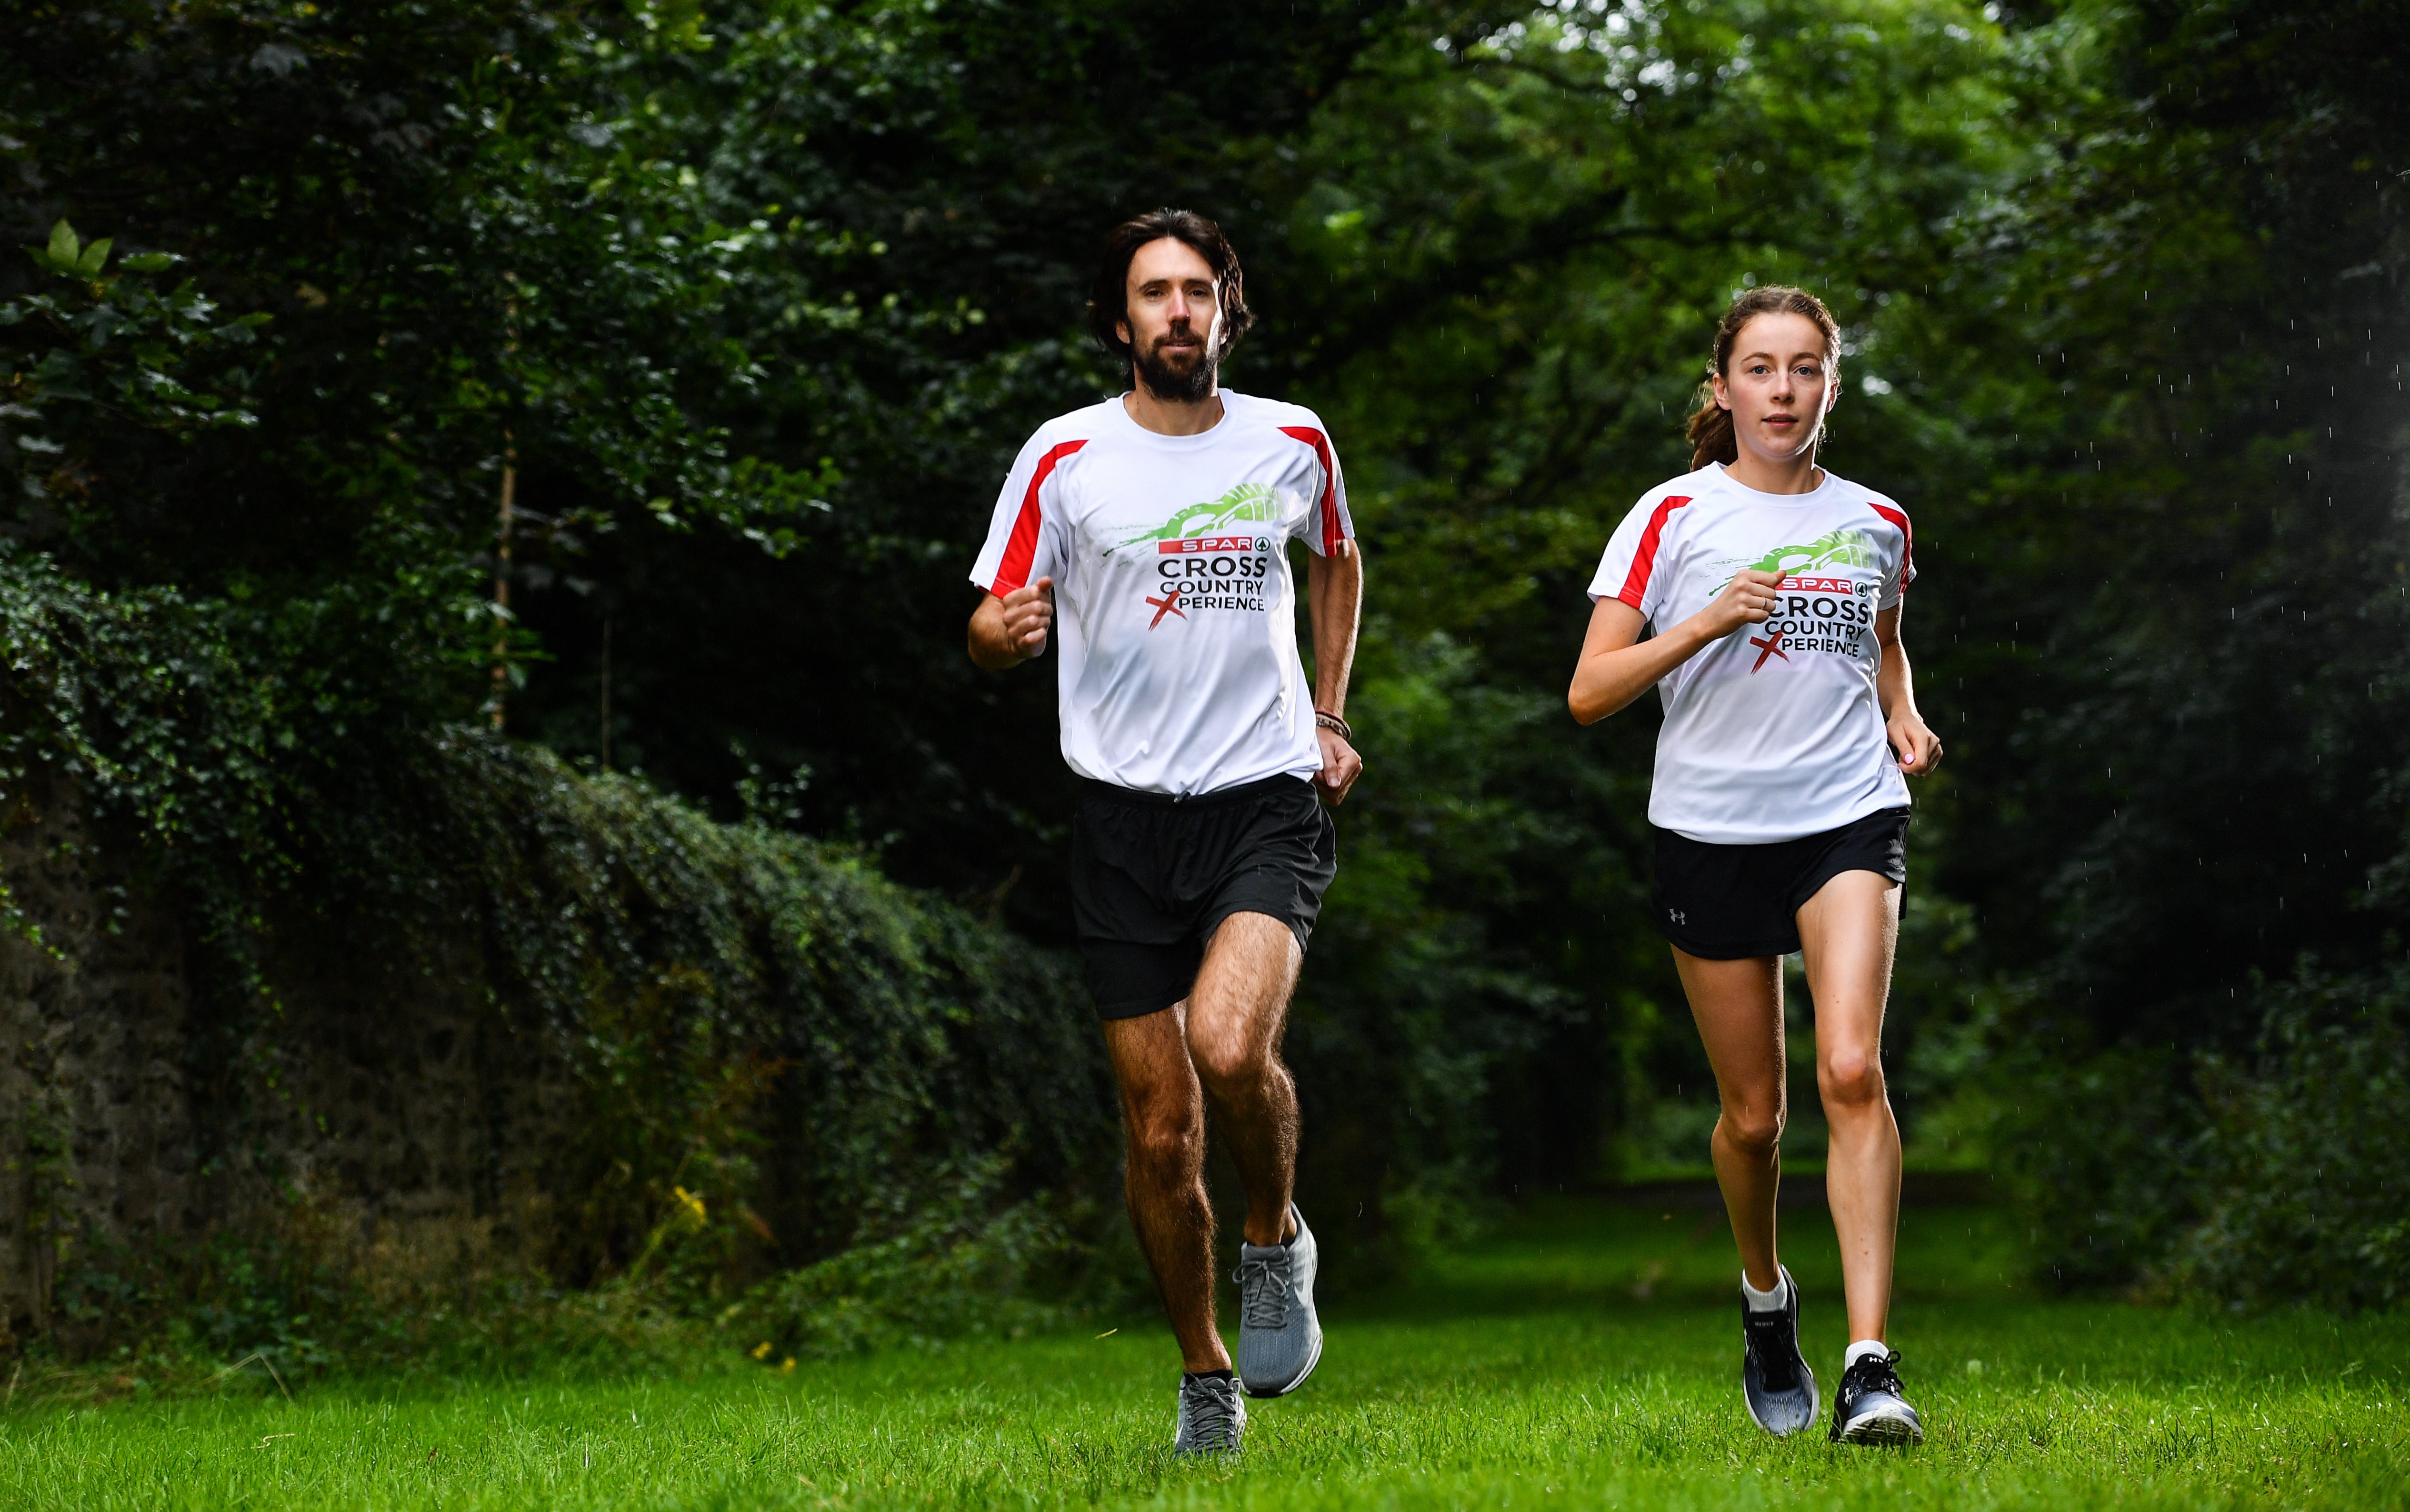 Cross Country runners set to SPAR at Autumn Open